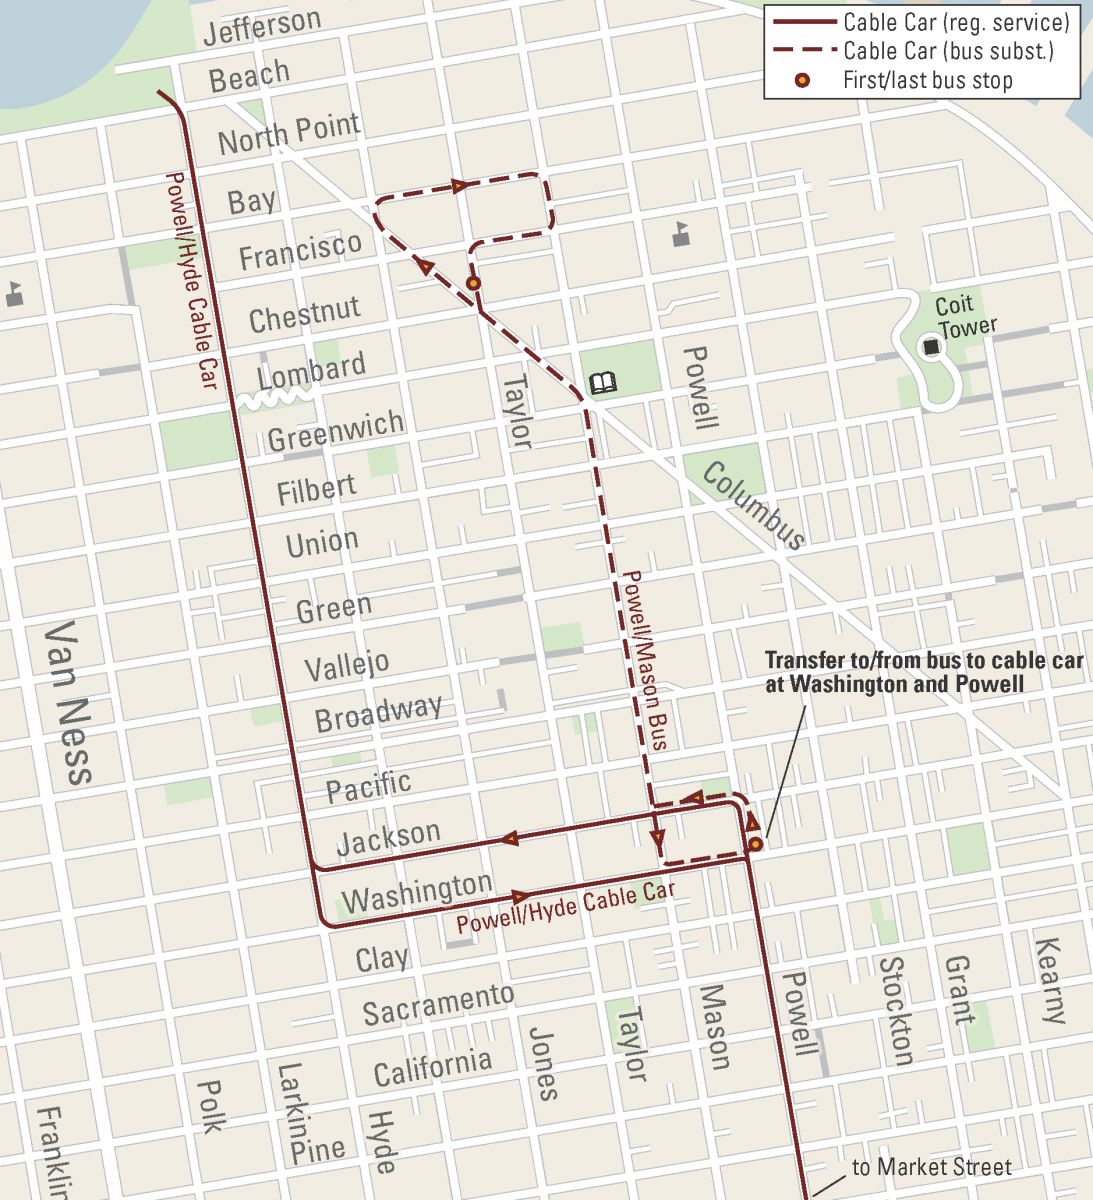 Route map for free shuttle bus on Mason.